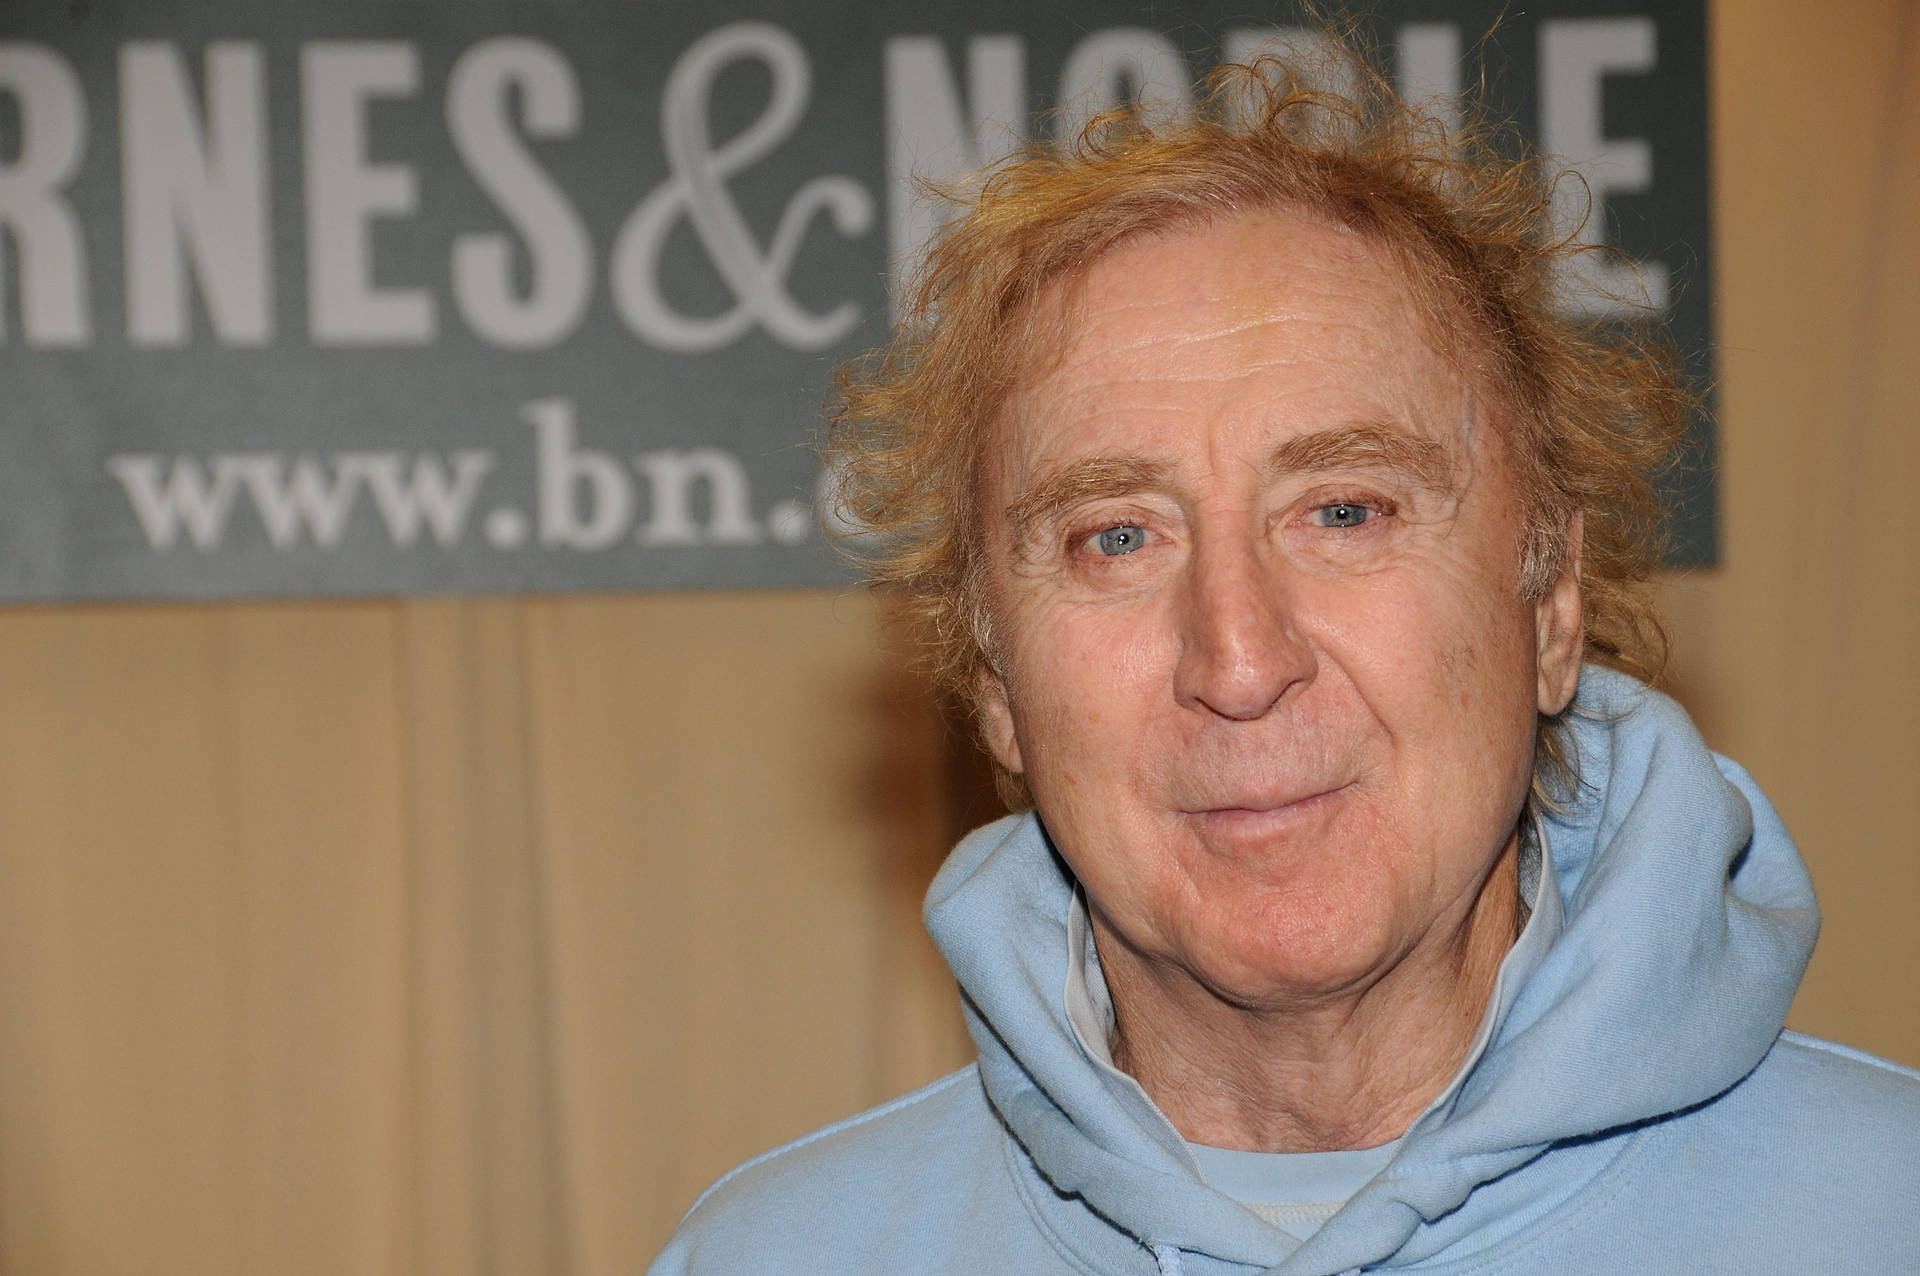 Legendary Actor Gene Wilder during a book signing event at Barnes and Noble. Wallpaper